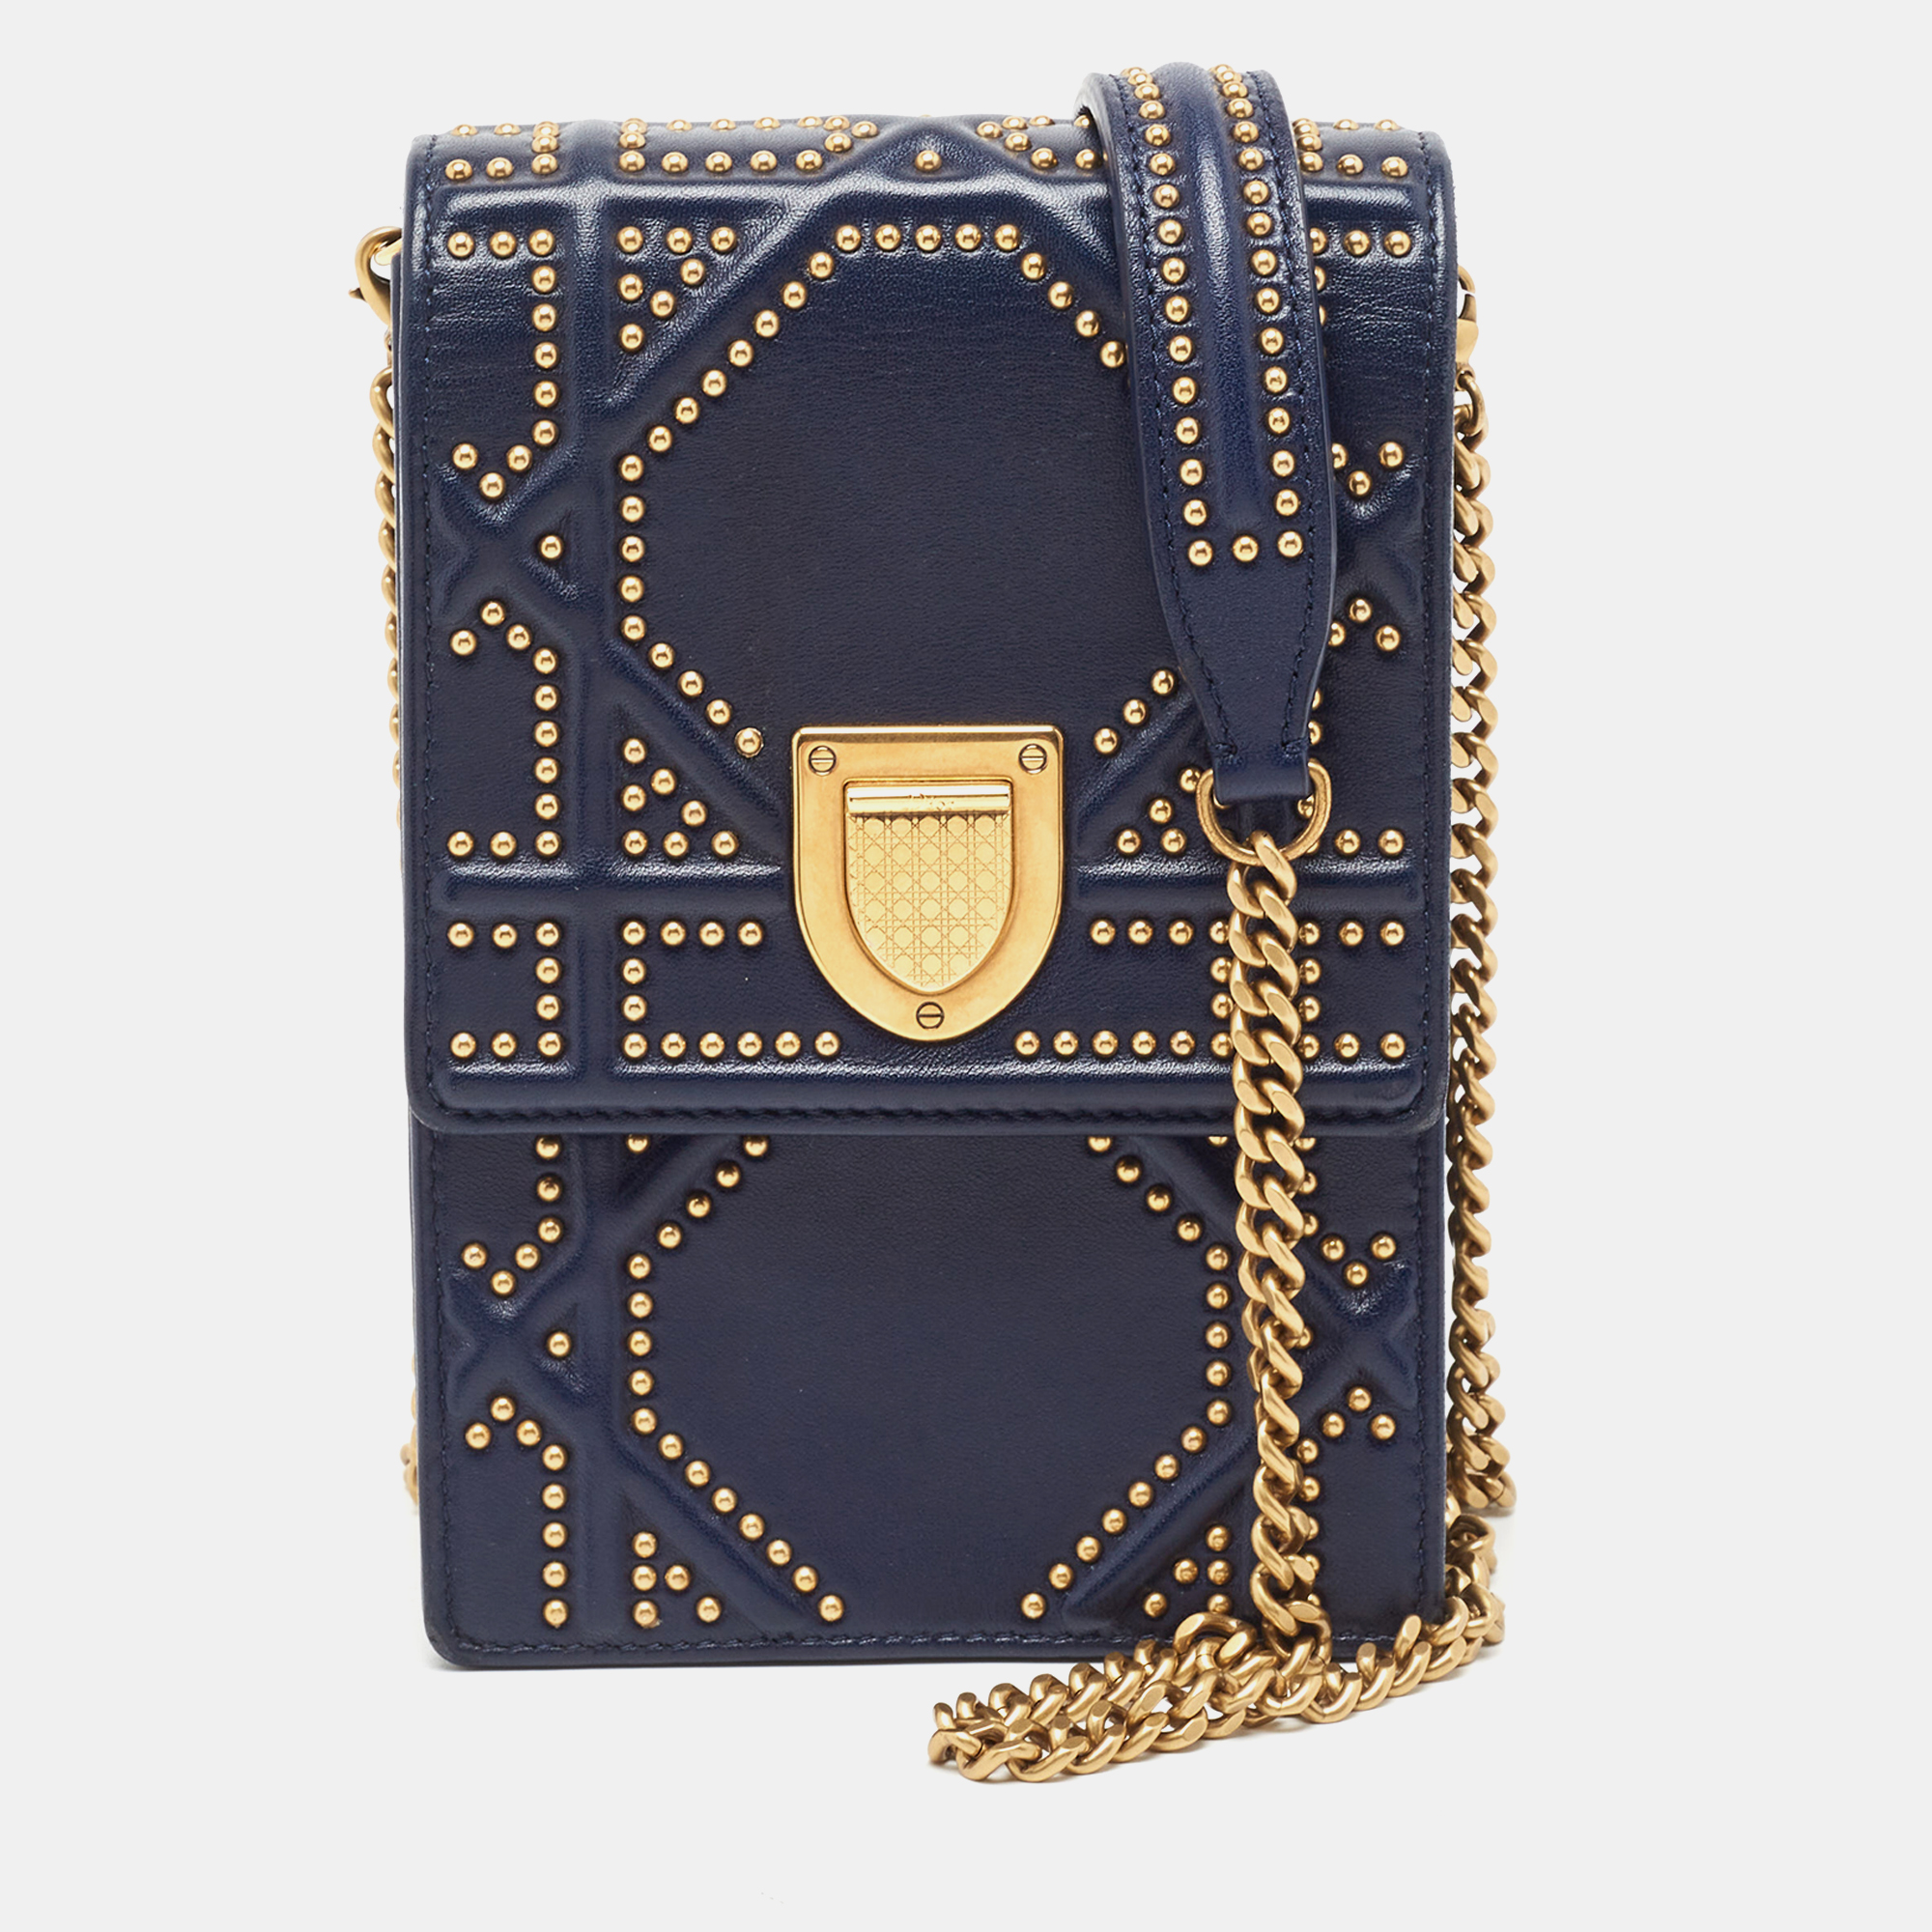 Dior Navy Blue Leather Studded Diorama Vertical Chain Clutch